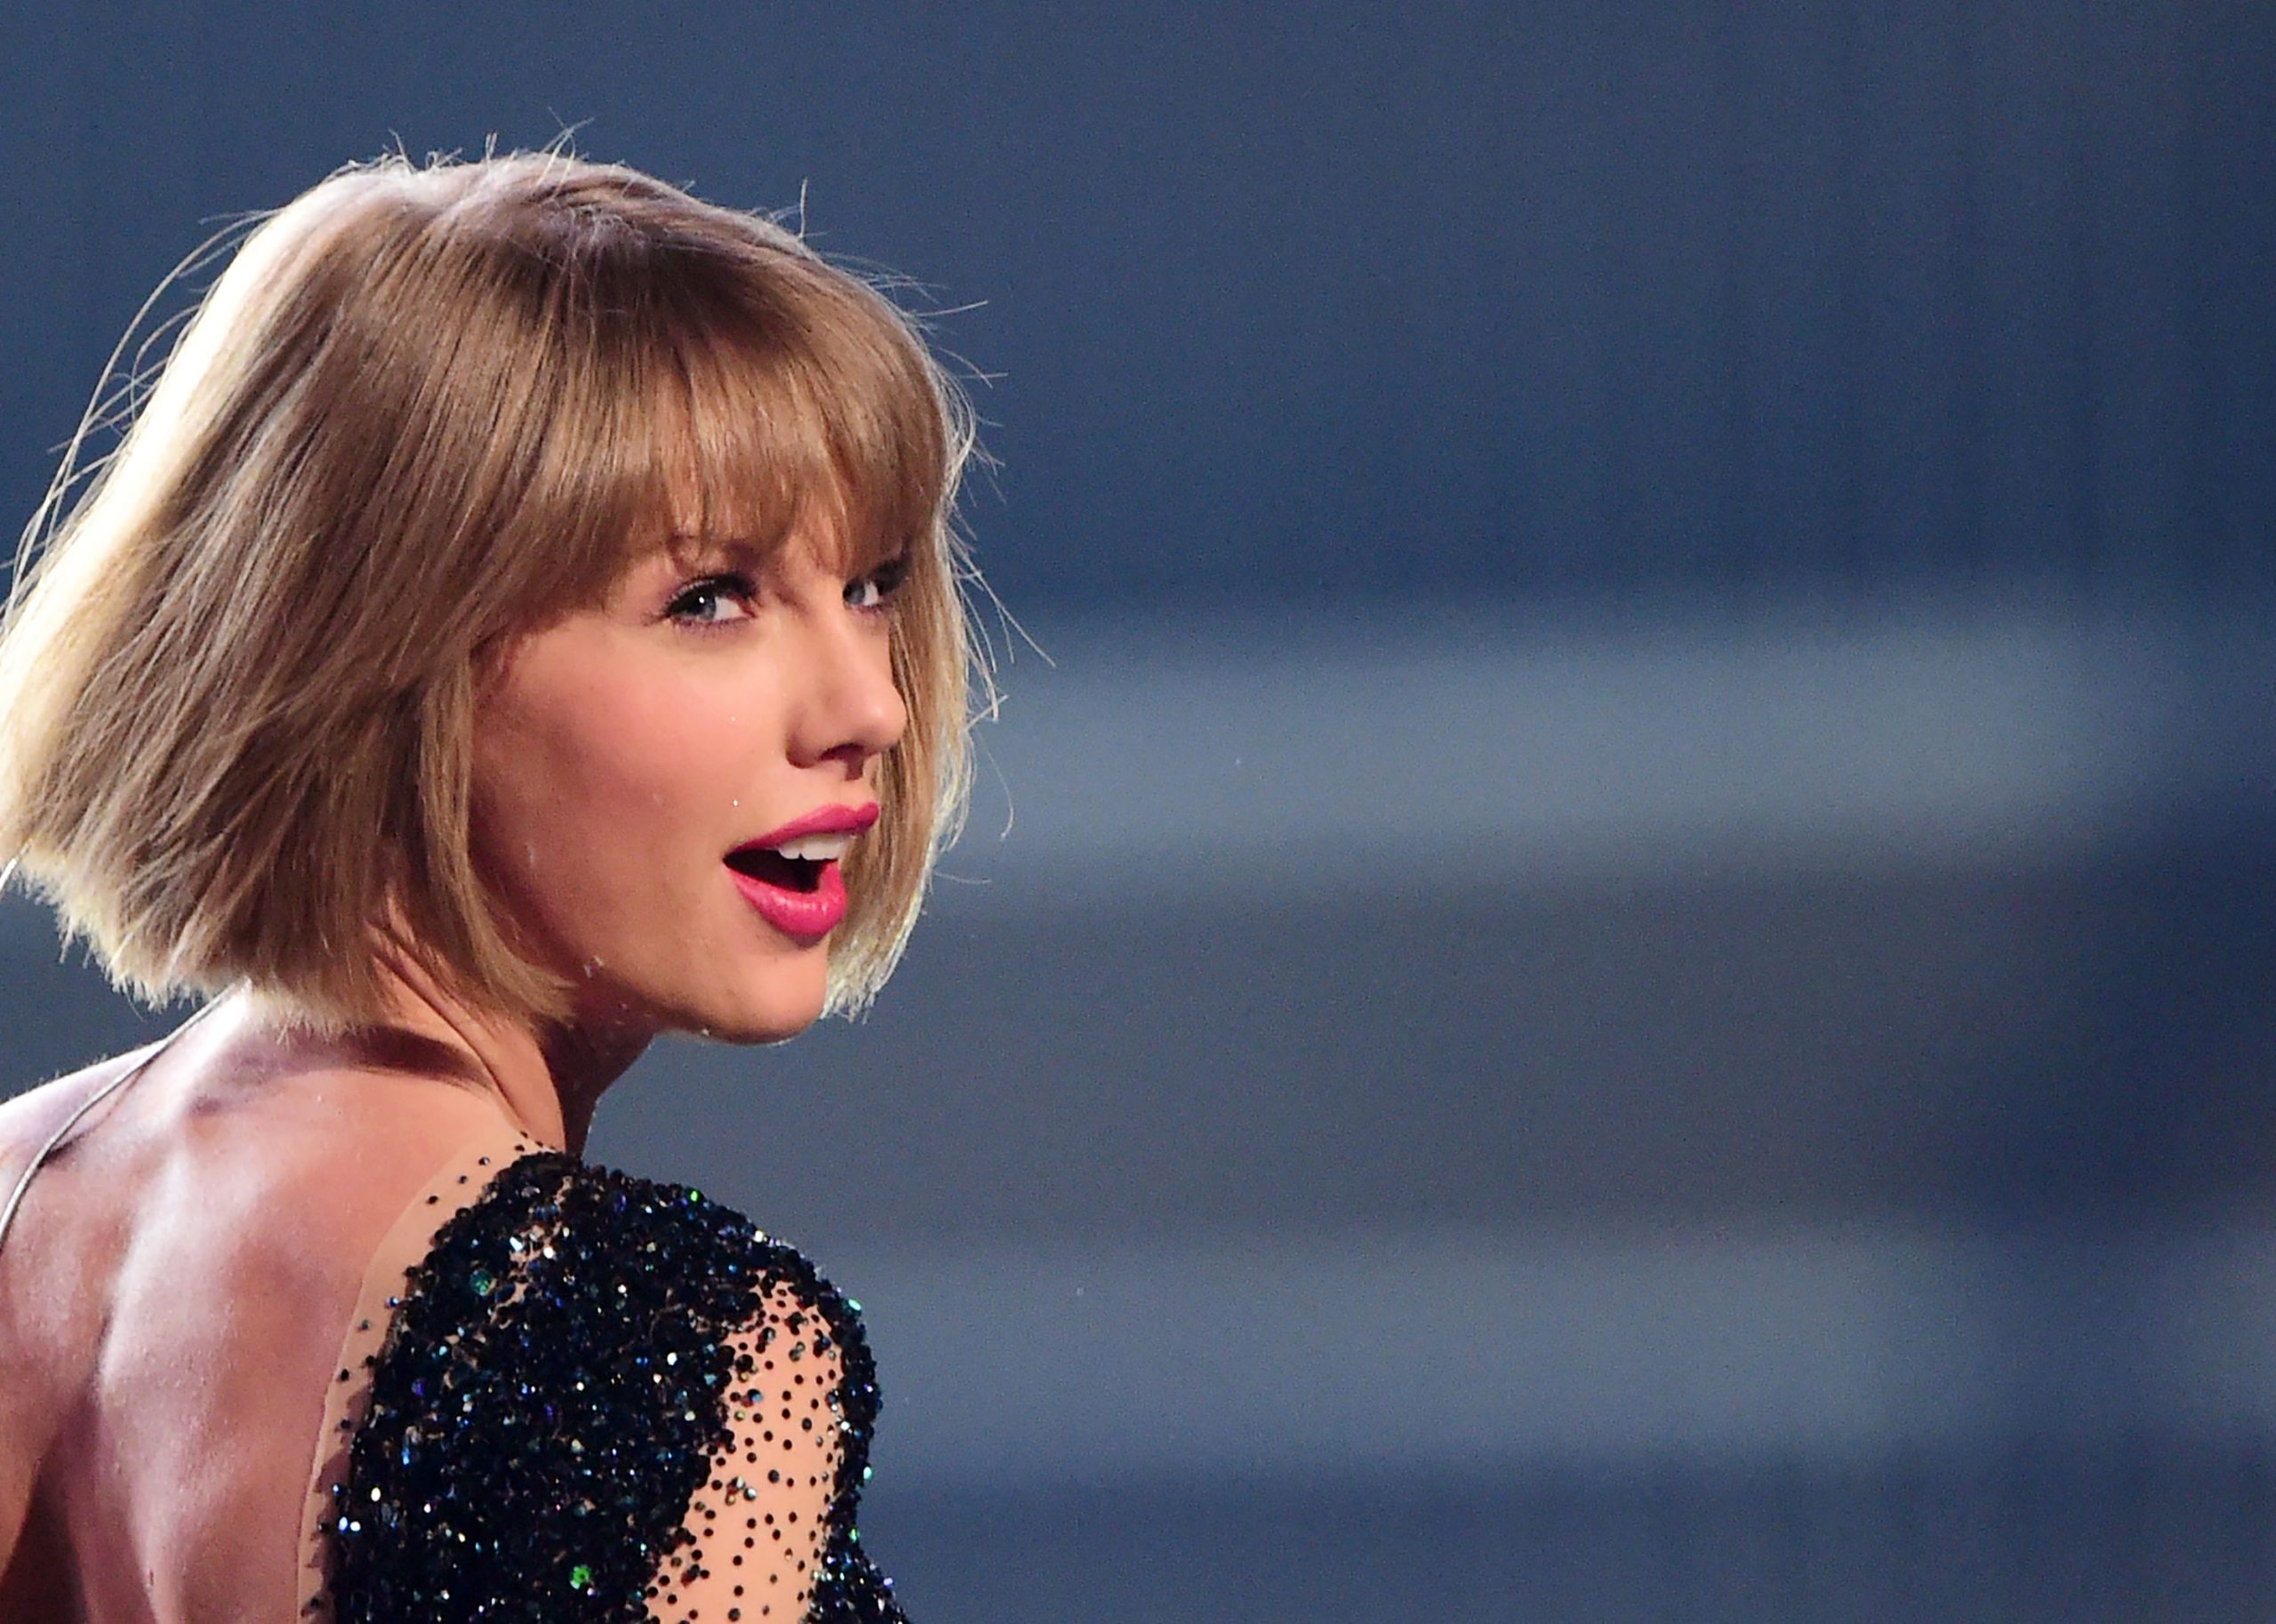 Swift and scandals: A look at Taylor Swifts controversies